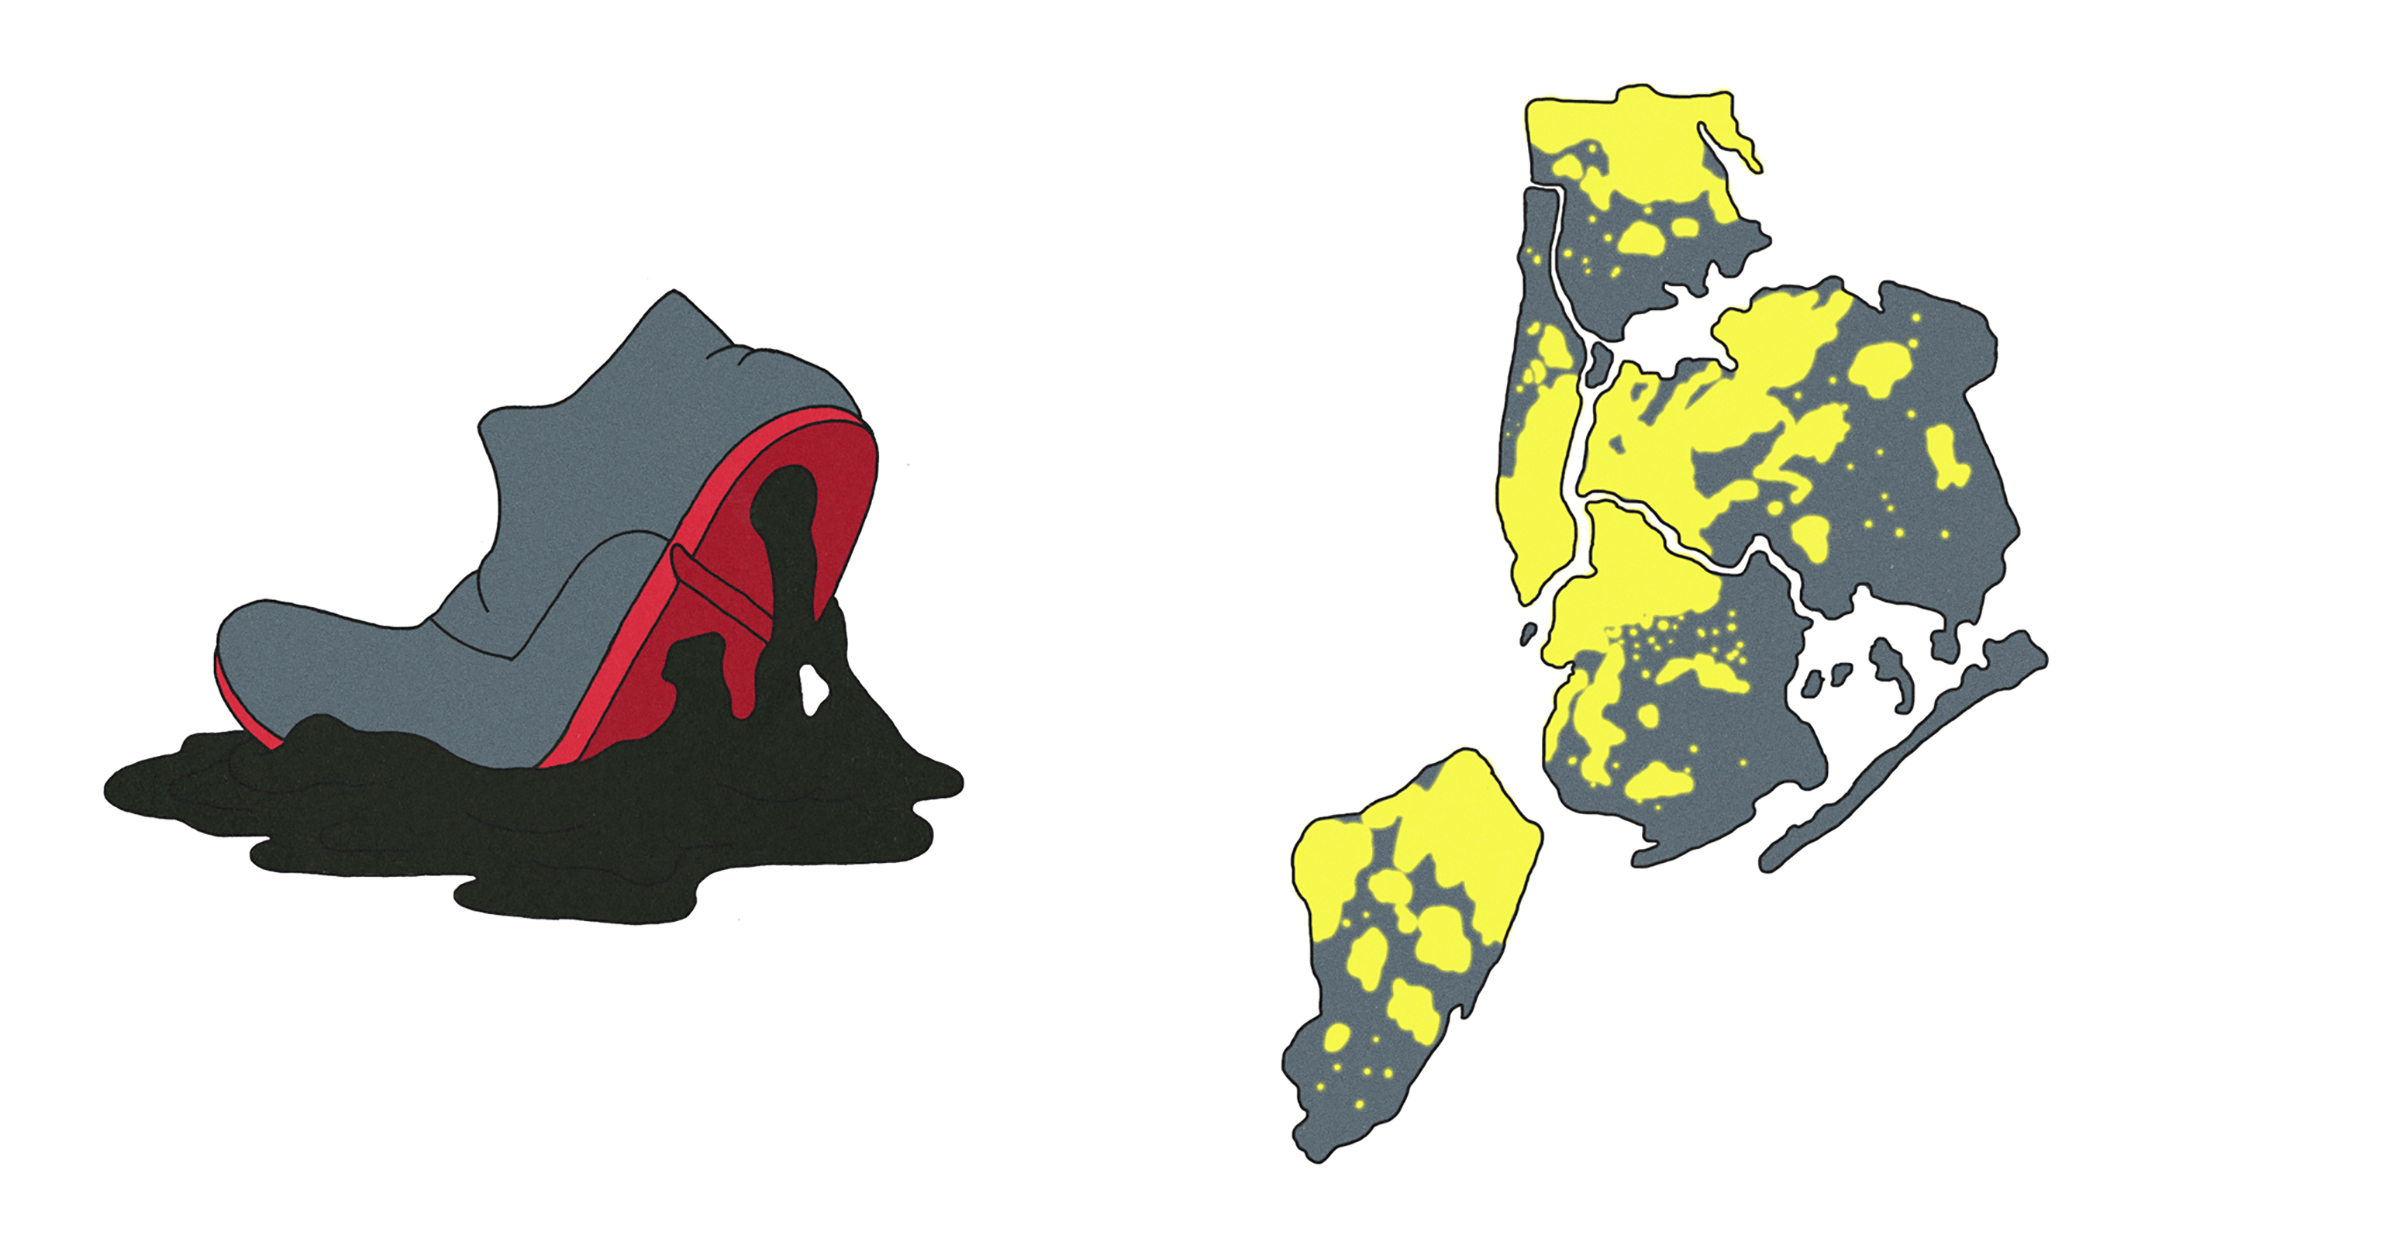 illustrations of a foot sticking to melted asphalt and New York City going through a blackout.